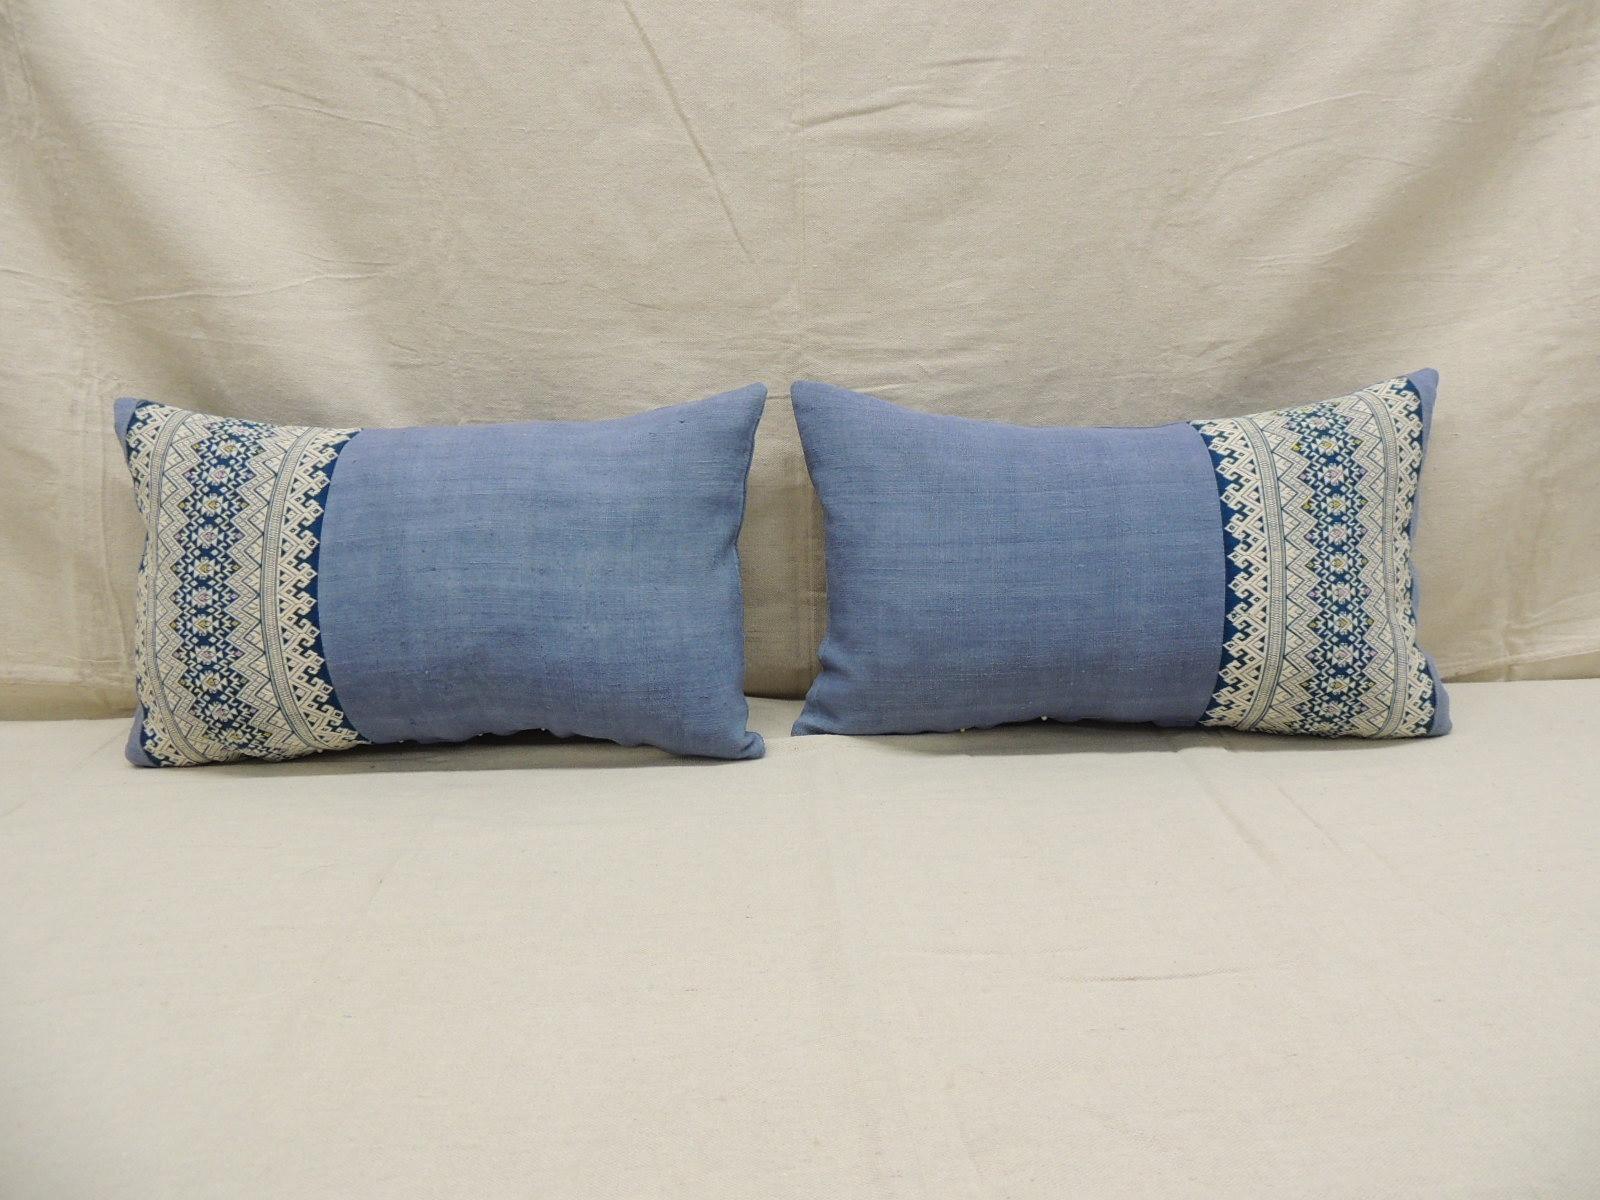 Pair of vintage blue and white Asian decorative lumbar pillows.
Antique linen frame, same as backing with Asian embroidered textile.
Size: 12